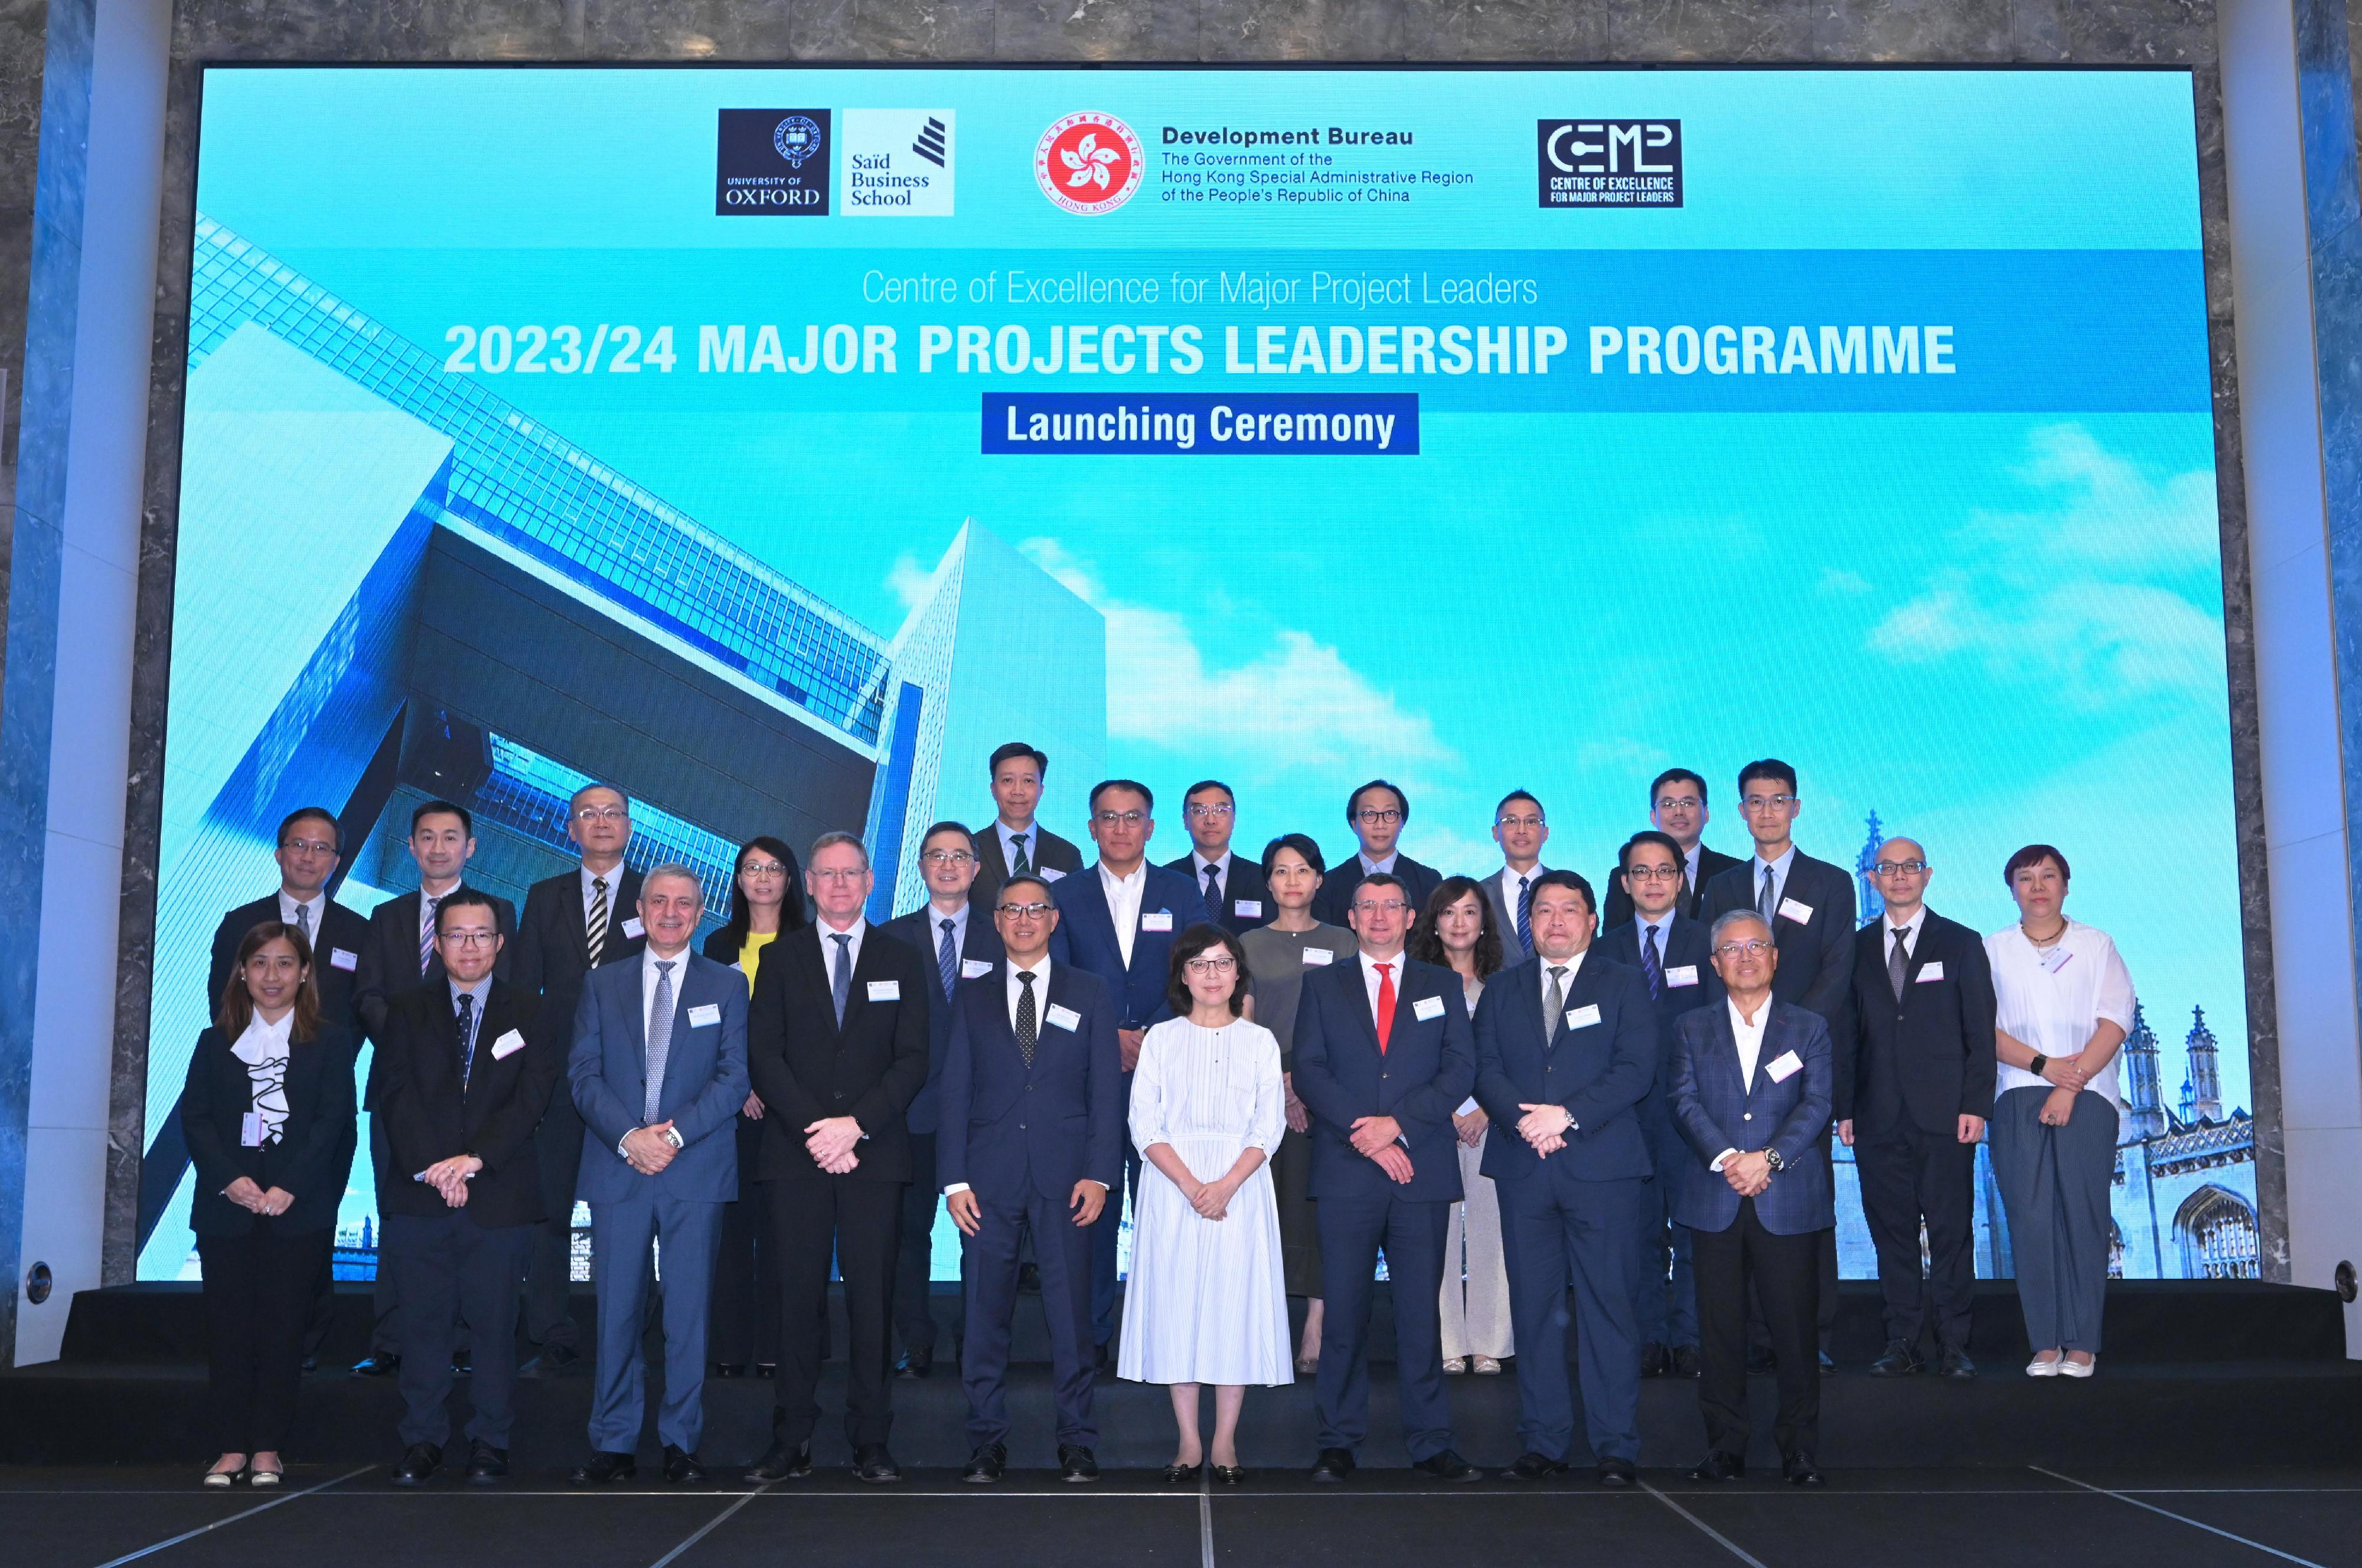 The Centre of Excellence for Major Project Leaders (CoE) under the Development Bureau launched today (August 28) the 2023/24 Major Projects Leadership Programme. Photo shows the Secretary for Development and Chairman of the CoE, Ms Bernadette Linn (first row, fourth right); and the Permanent Secretary for Development (Works) and Superintendent of the CoE, Mr Ricky Lau (first row, fifth right), with other guests and cohort members at the launching ceremony.